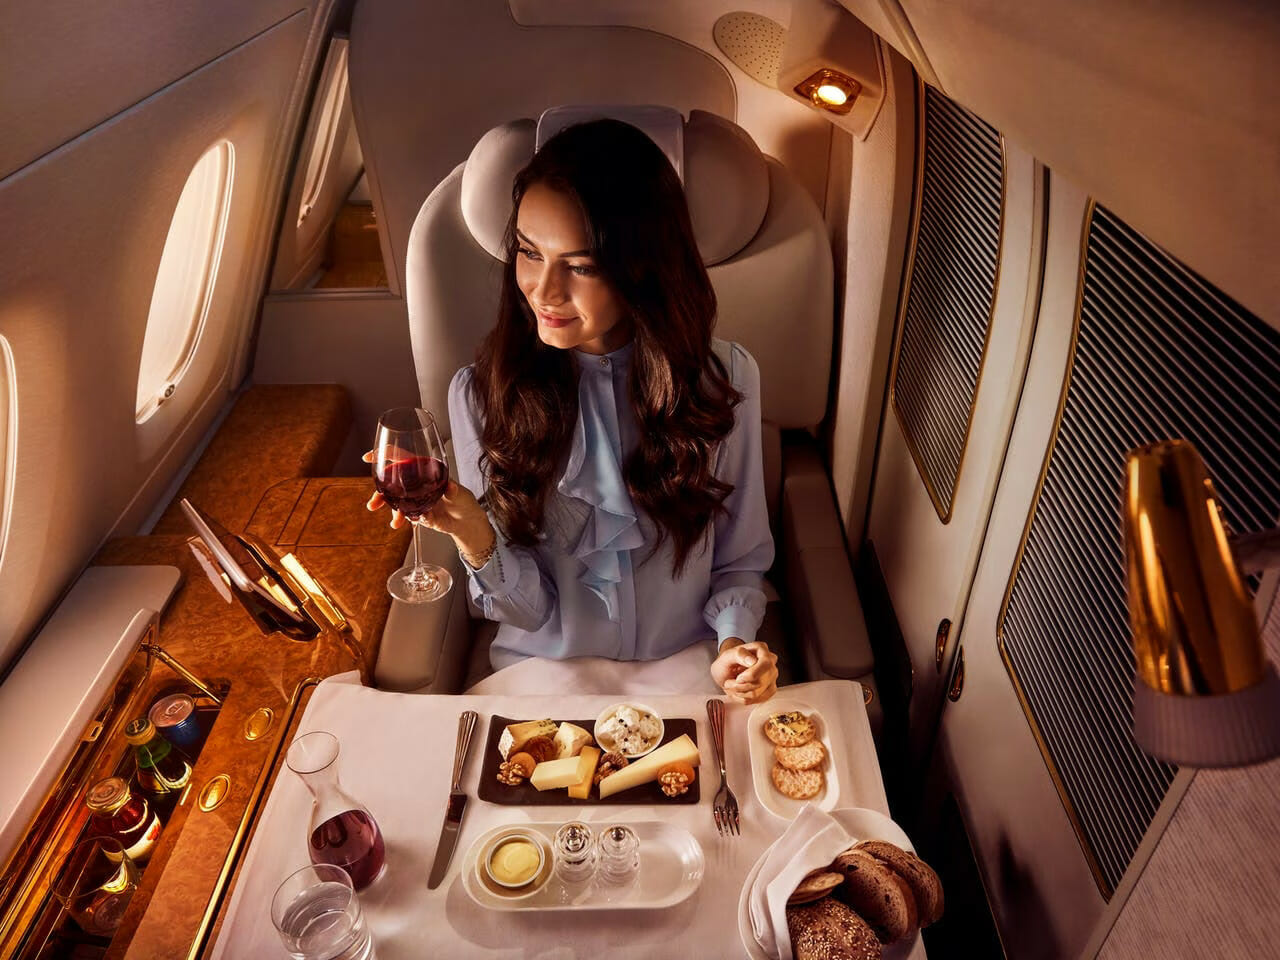 Woman sitting in first class drinking wine - private jet vs first class